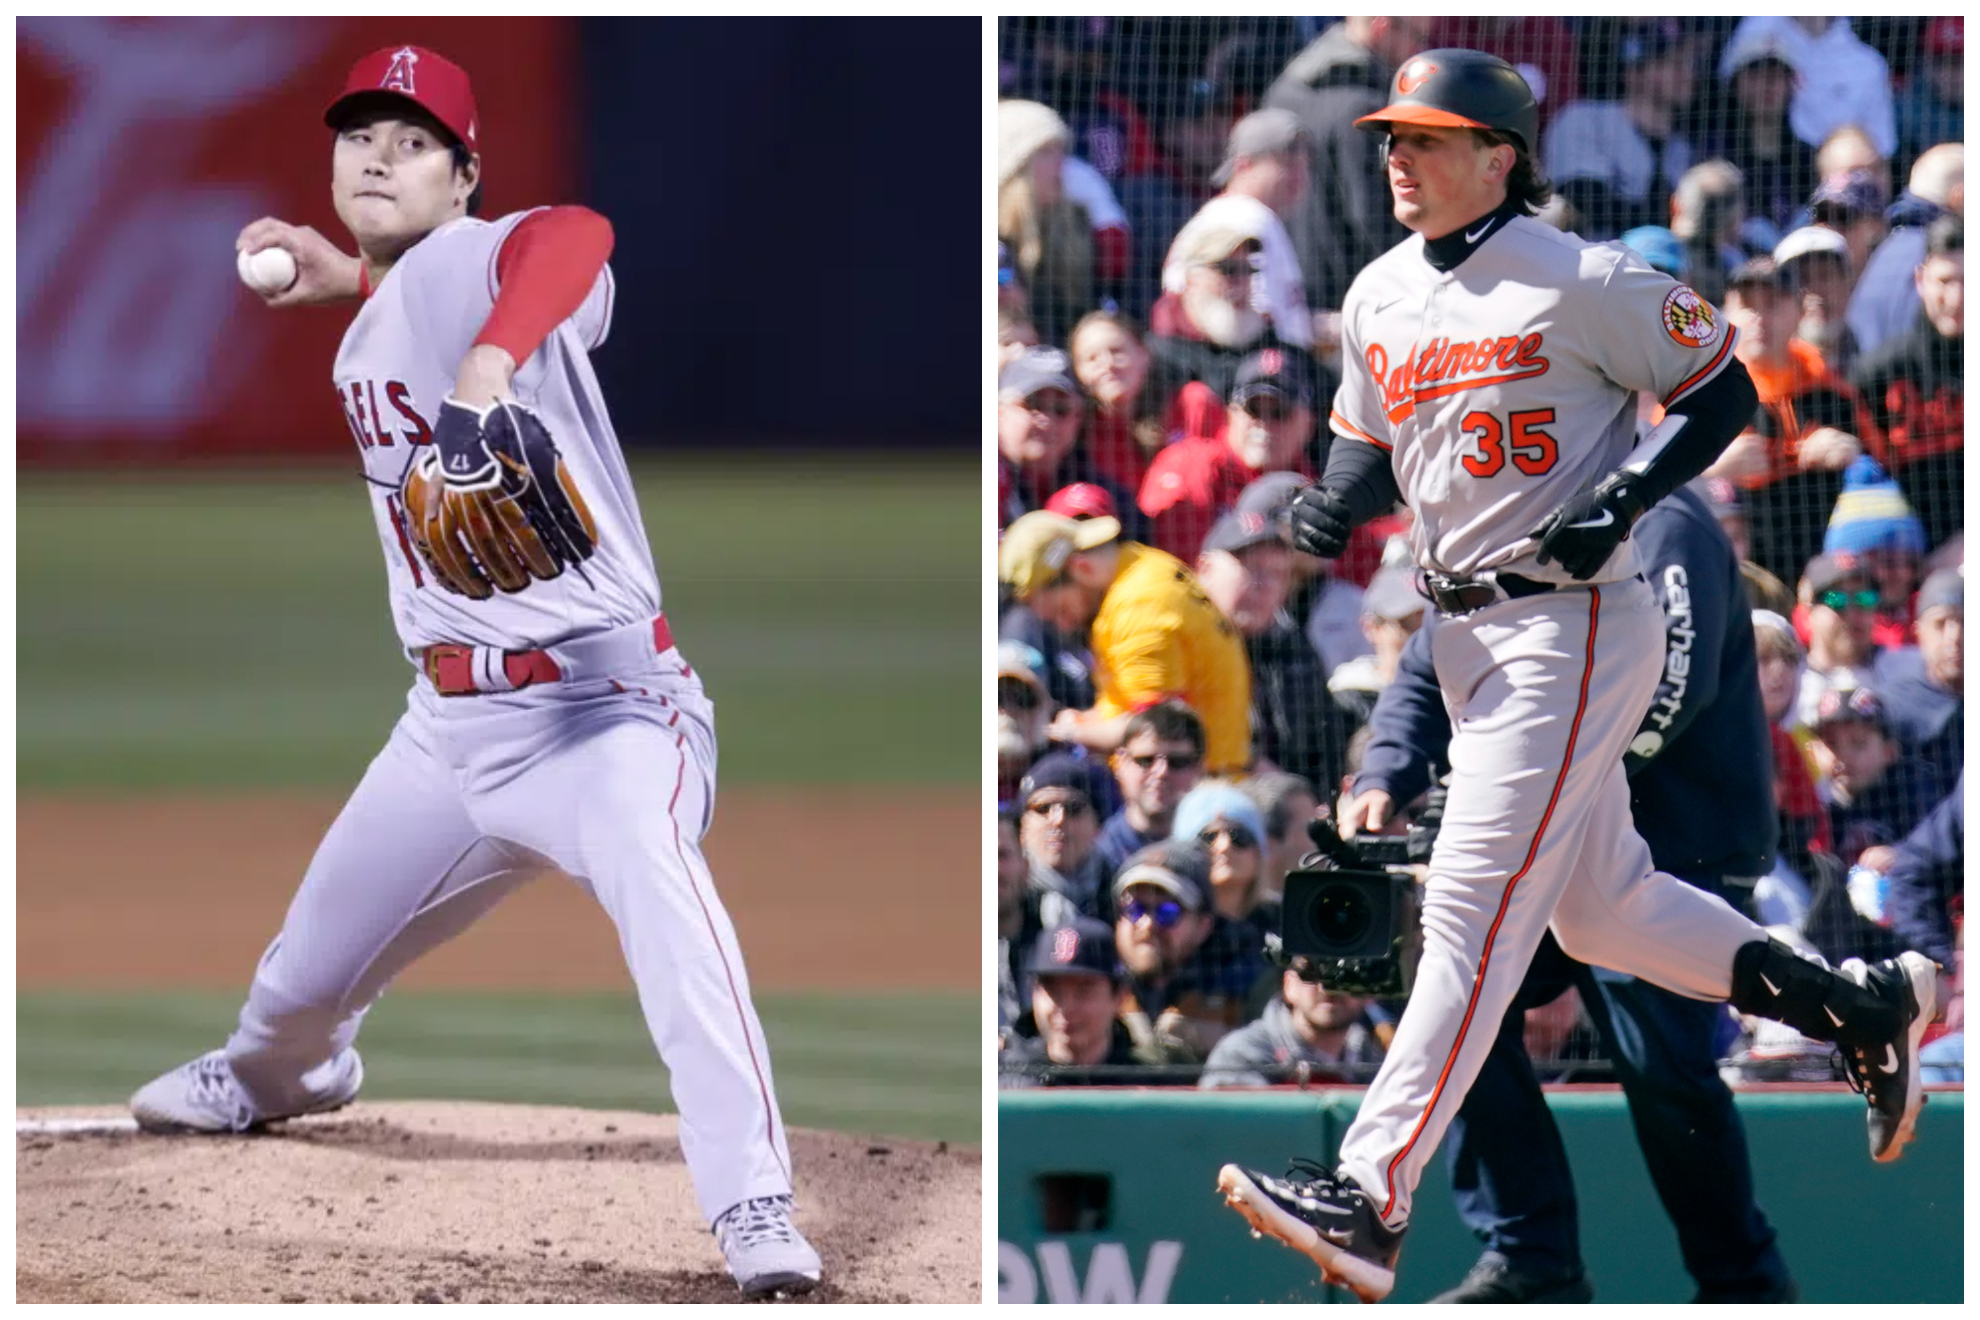 MLB News: Shohei Ohtani and Adley Rutschman broke records that had standed  over 120 years on Opening Day